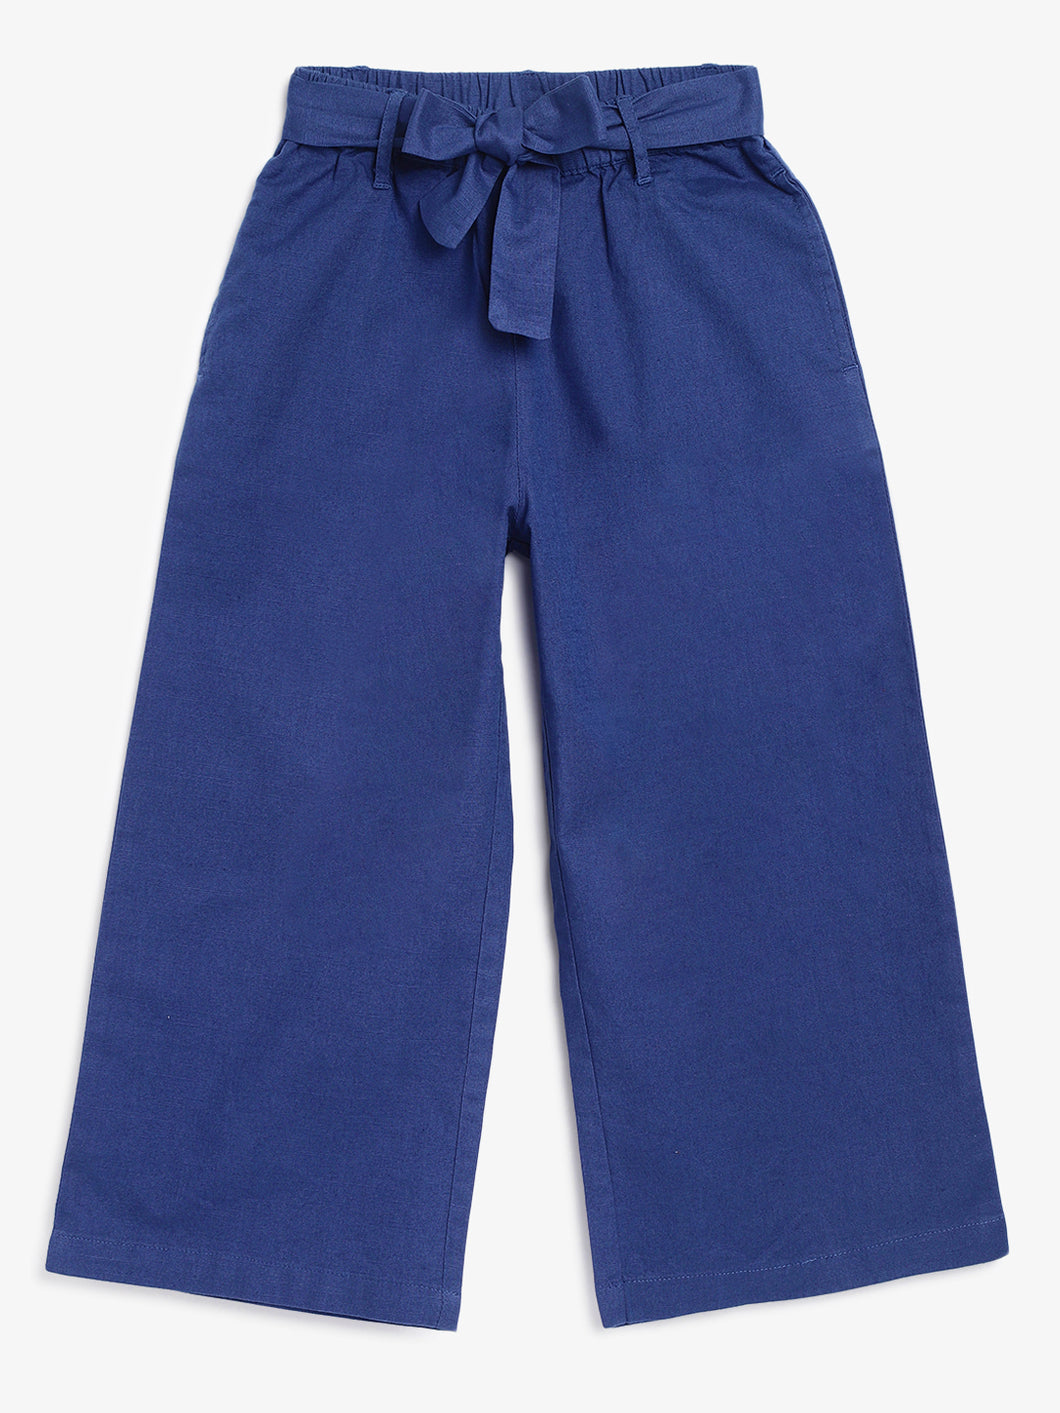 Campana Girls Chelsea 100% Cotton Culottes Trousers with Belt - Striking Blue